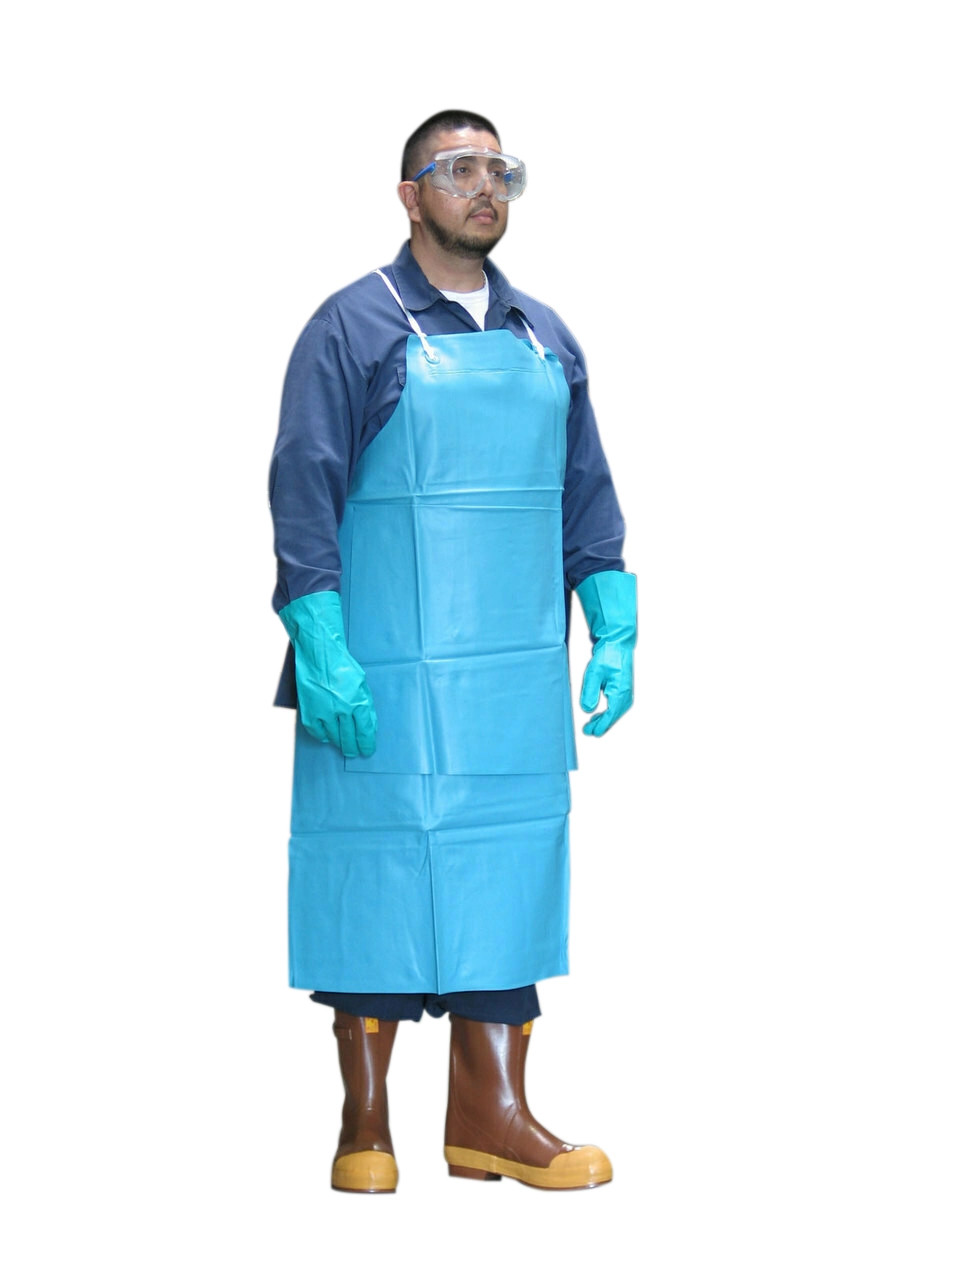 Ansell 56-230 Disposable Apron,Blue,46 in. L,PK100, Size: Universal